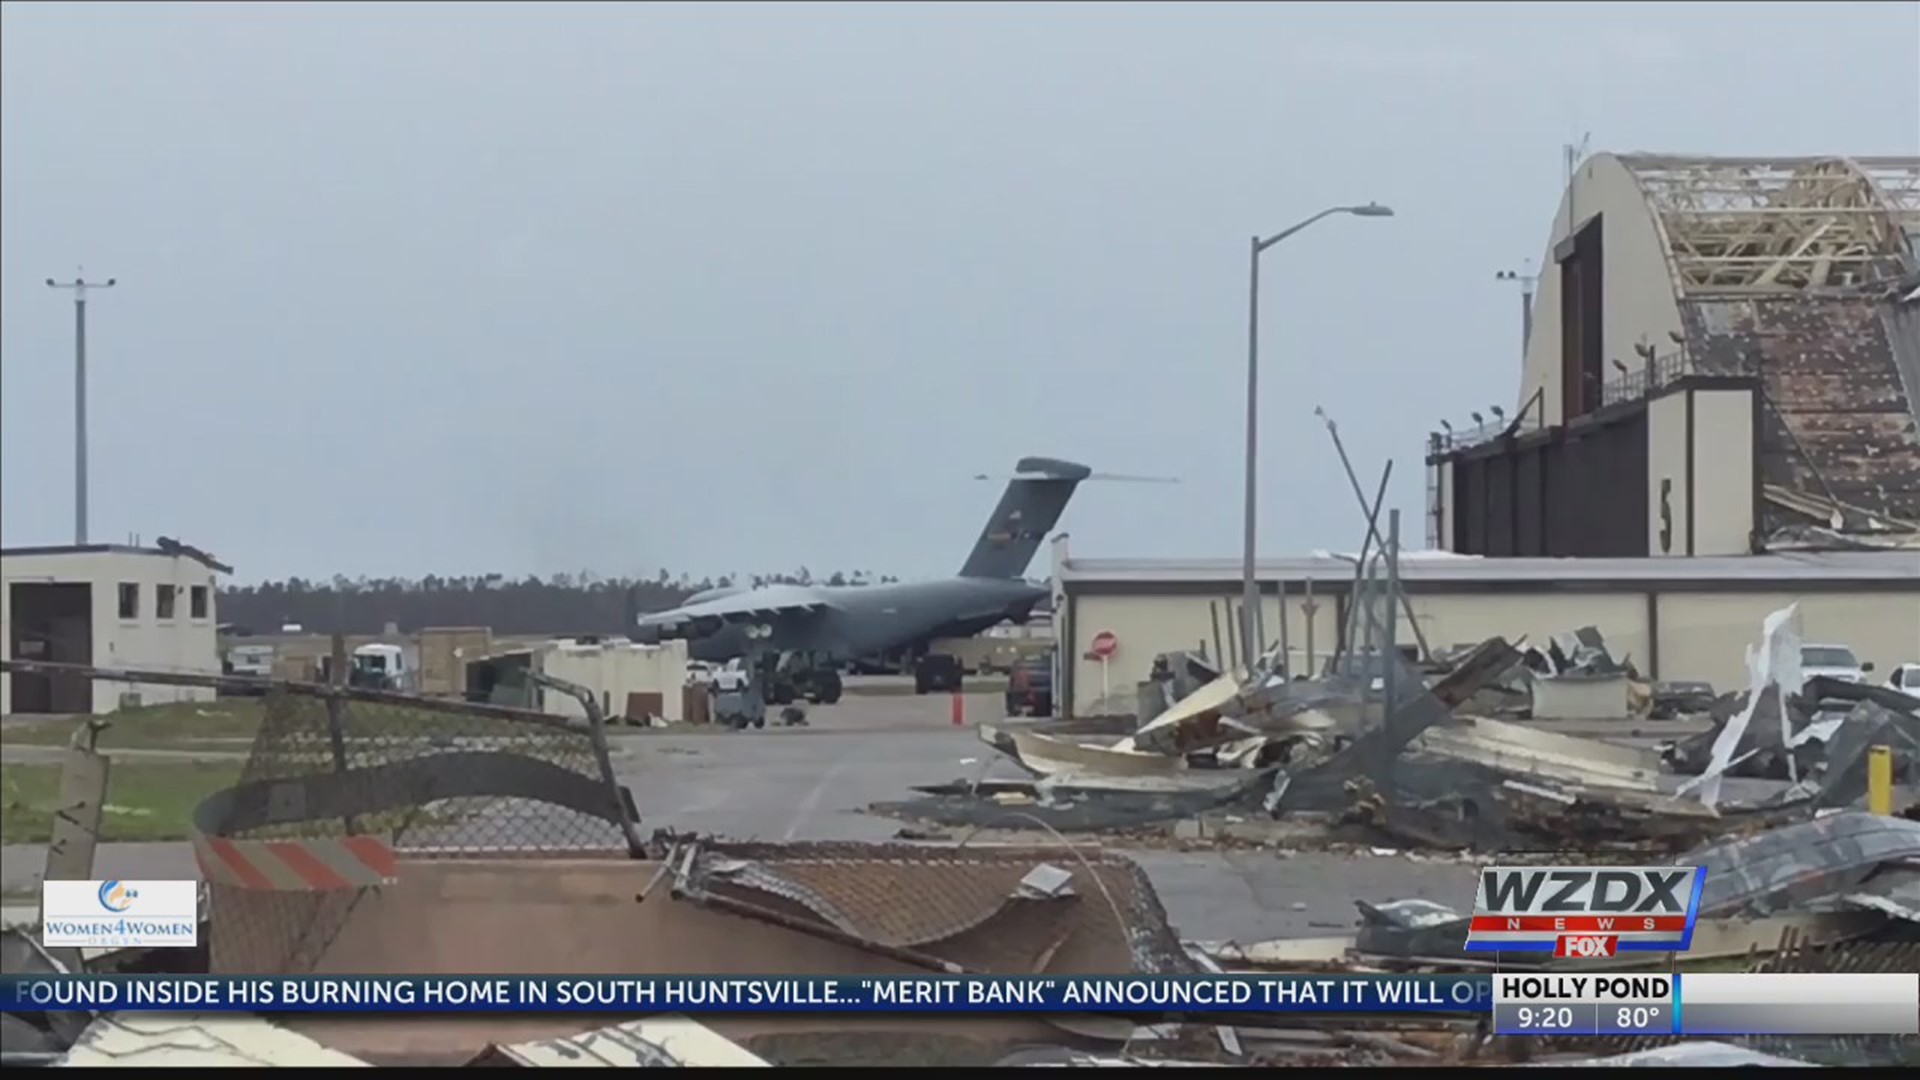 Since last October, Tyndall Air Force Base in Panama City has been slowly rebuilding—after suffering almost 5-billion dollars in damages from Hurricane Michael.